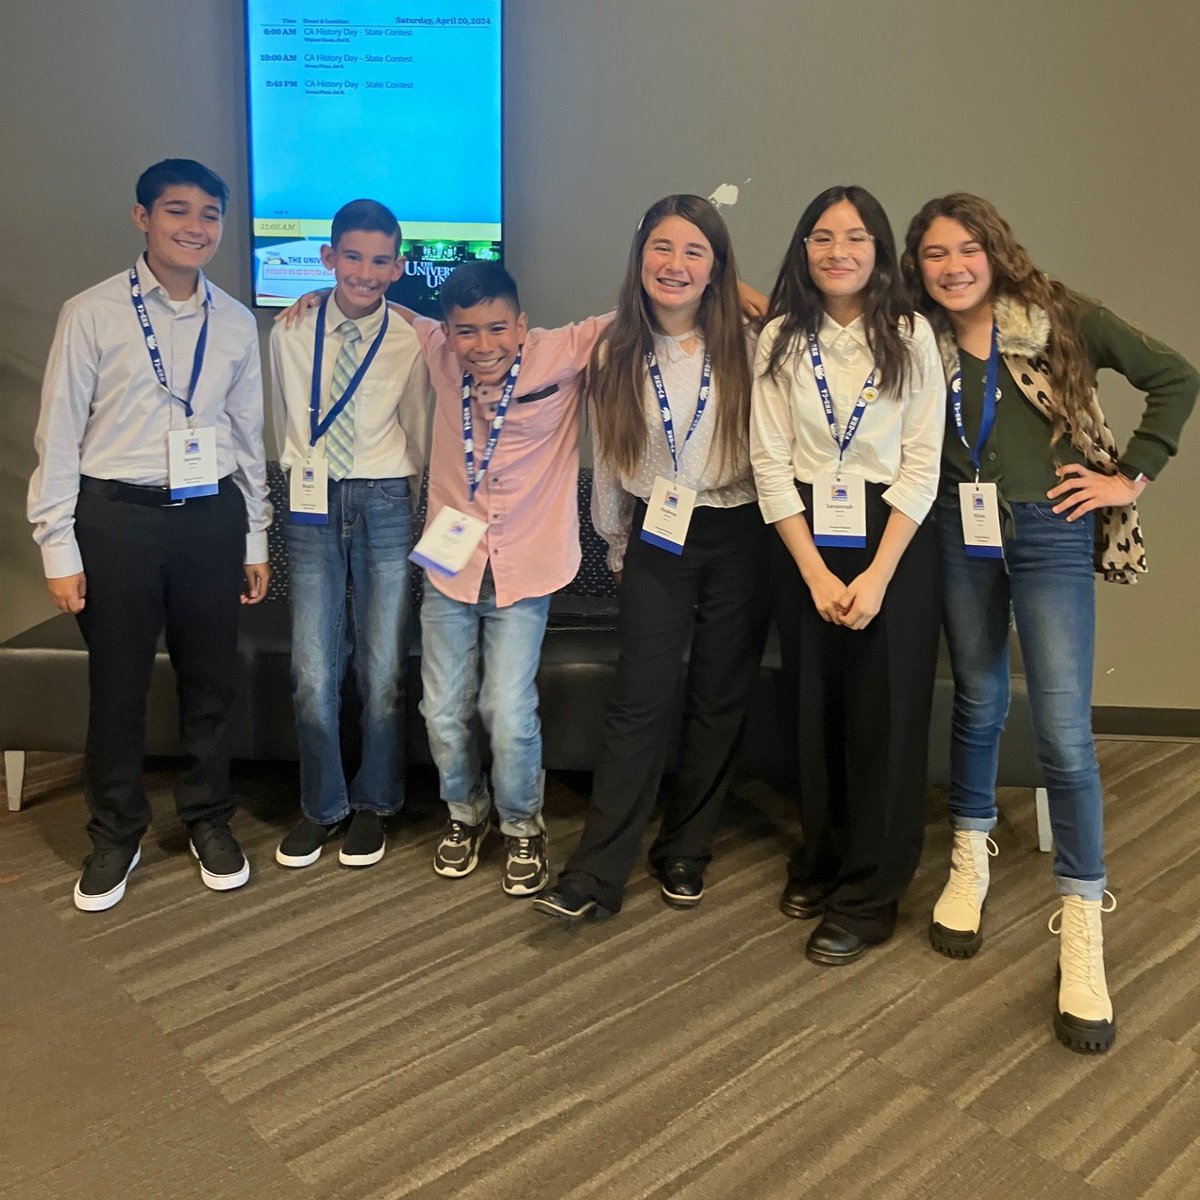 Thank you Tigers for your great performance at History Day California this weekend. You represented LAES and LA County well. Way to go Tigers on your amazing Podcasts.